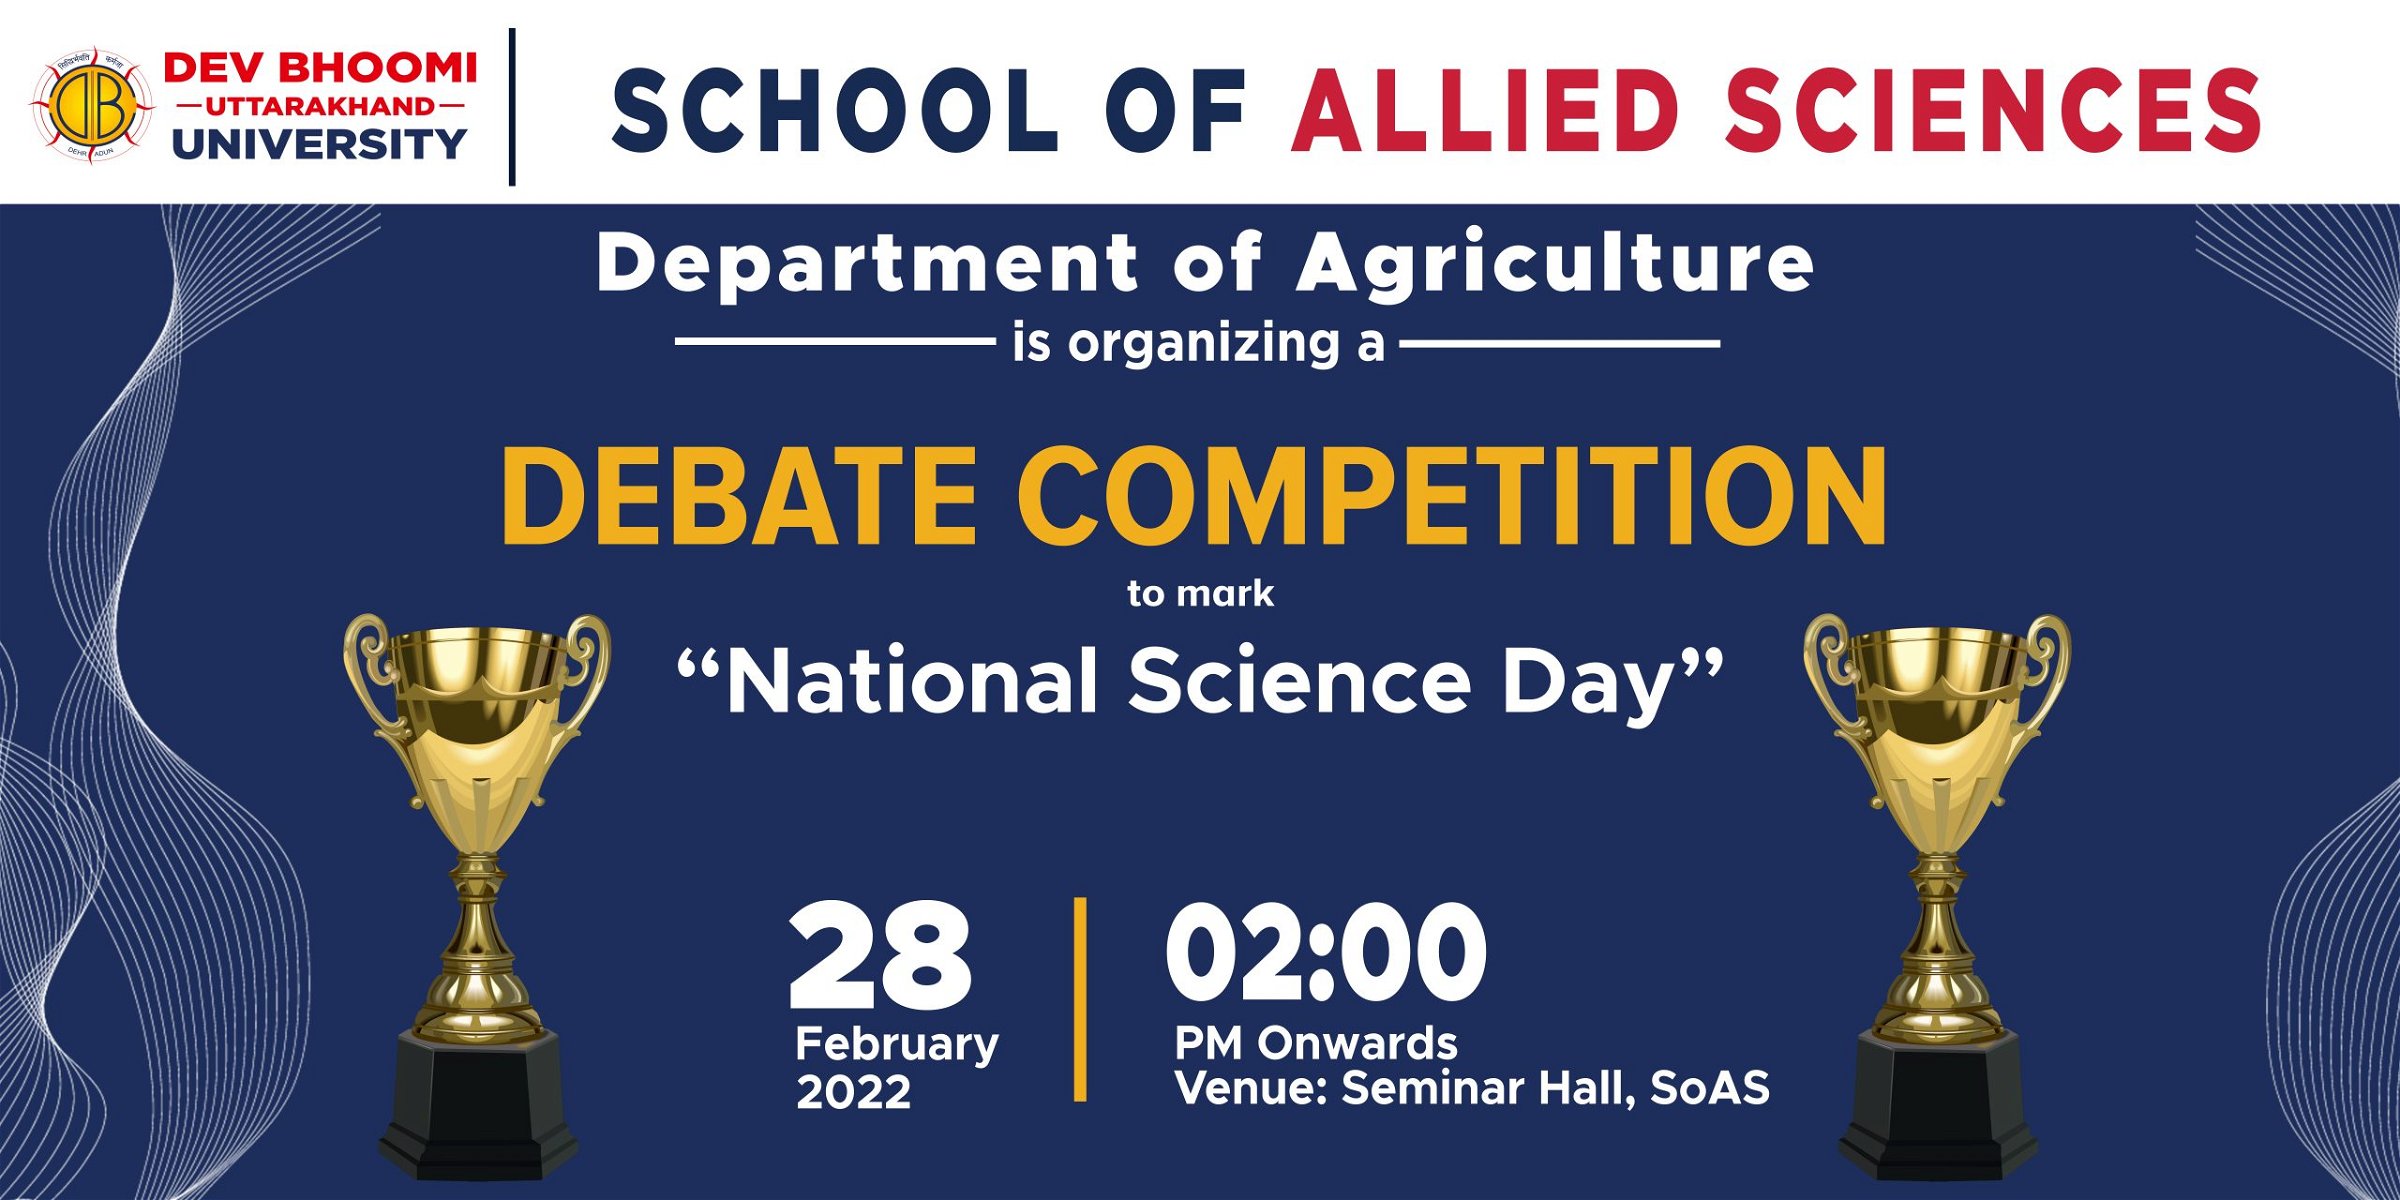 Debate competition to mark National Science Day